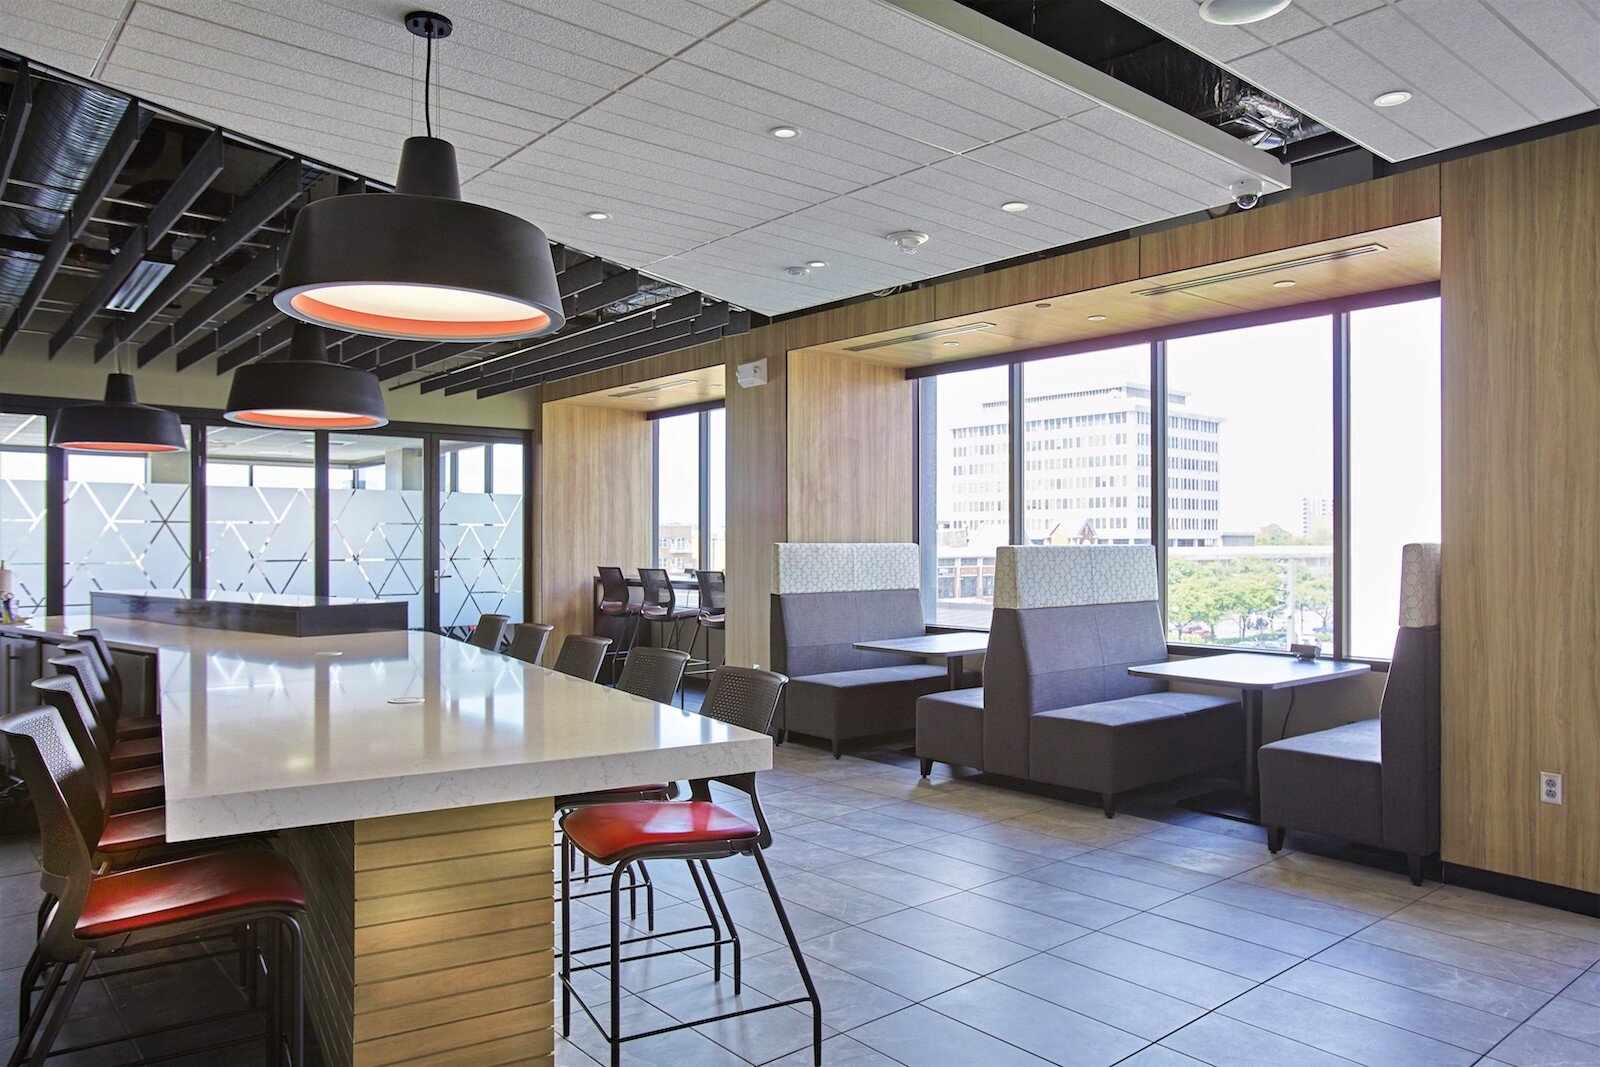 Pizza Hut of Fort Wayne’s headquarters includes an open office concept with several Universal Design features.